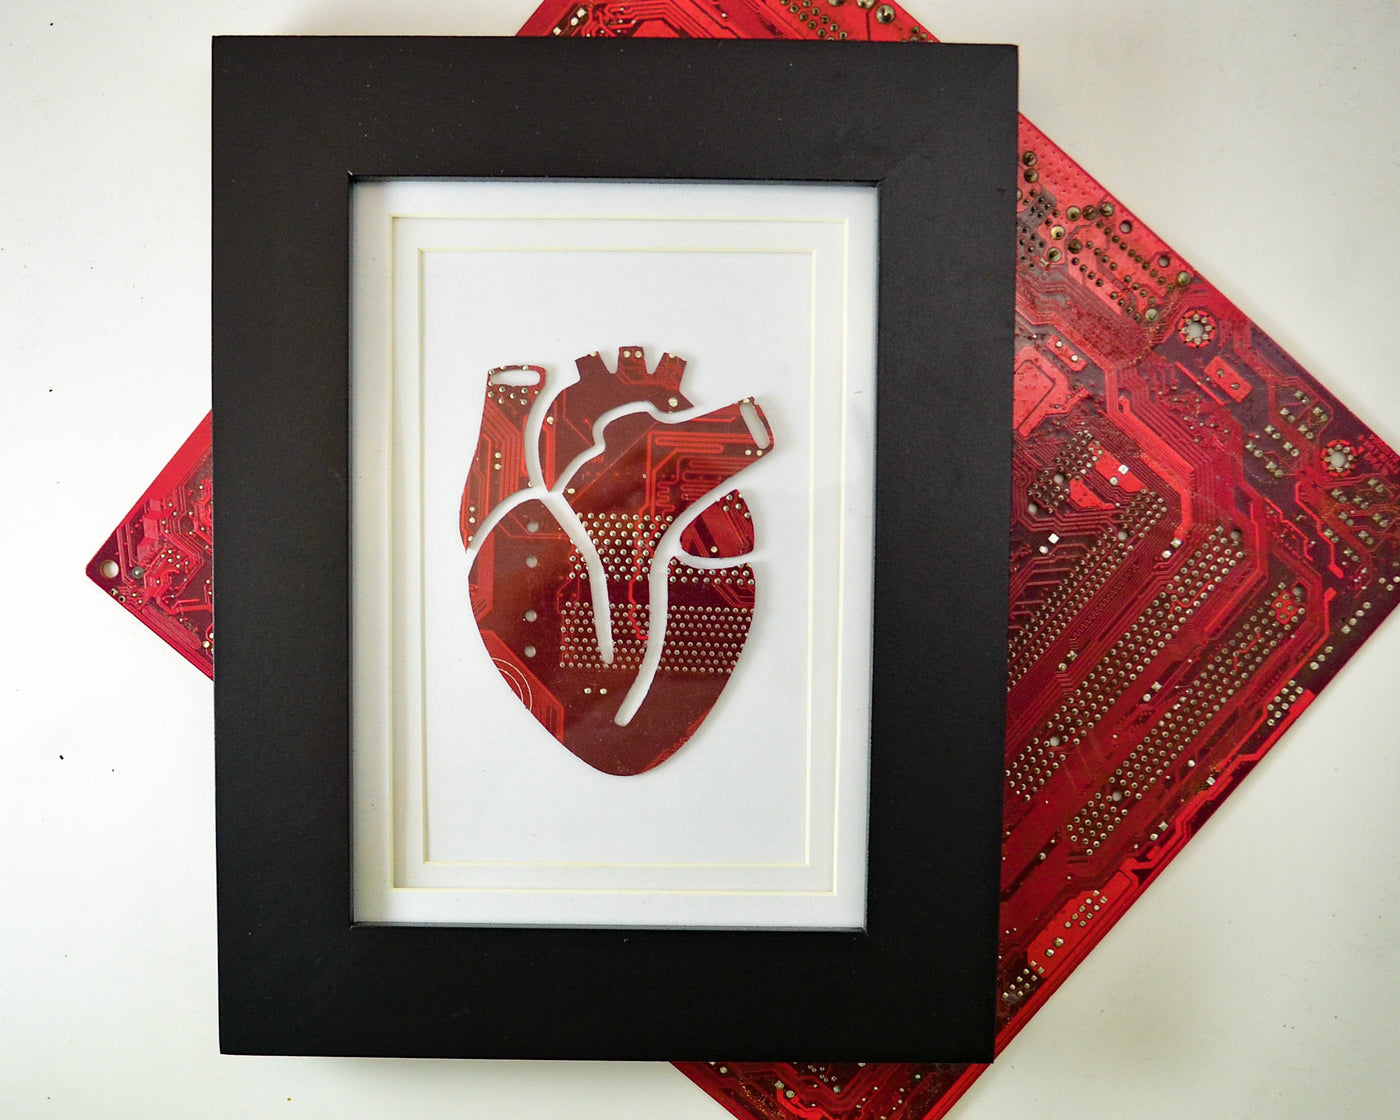 framed anatomical heart art made from recycled circuit boards